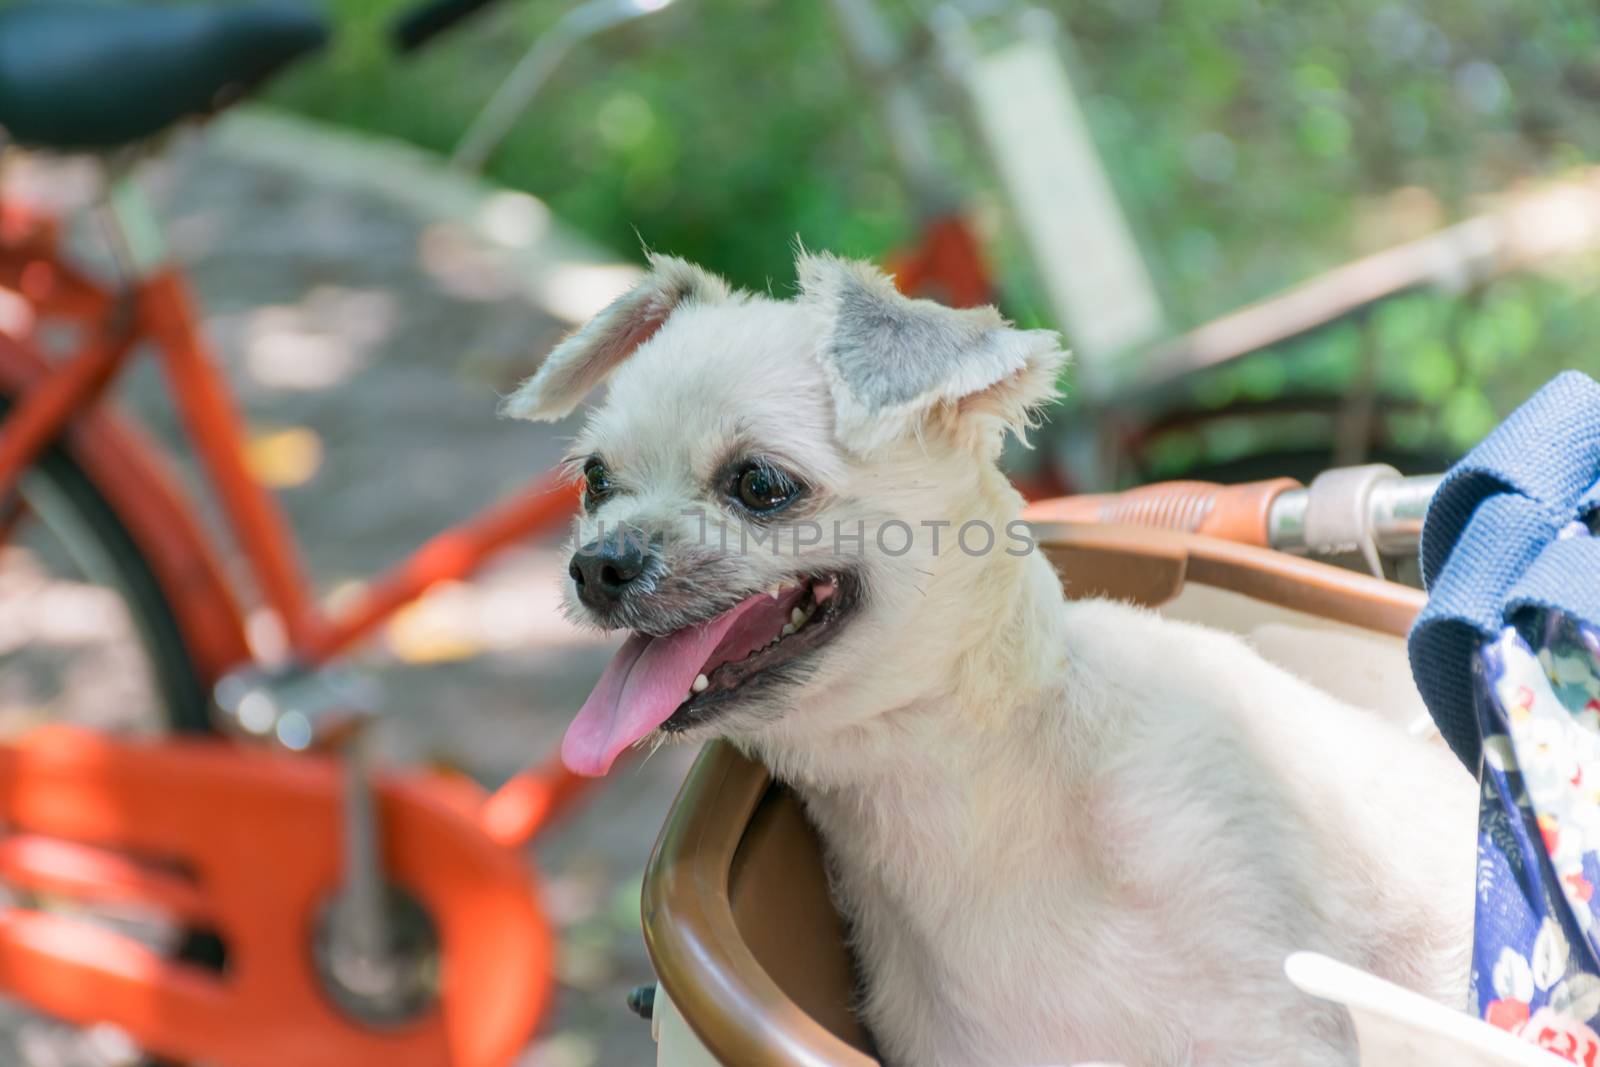 Dog so cute beige color mixed breed with Shih-Tzu, Pomeranian and Poodle on bicycle basket vintage style wait for vacation travel trip